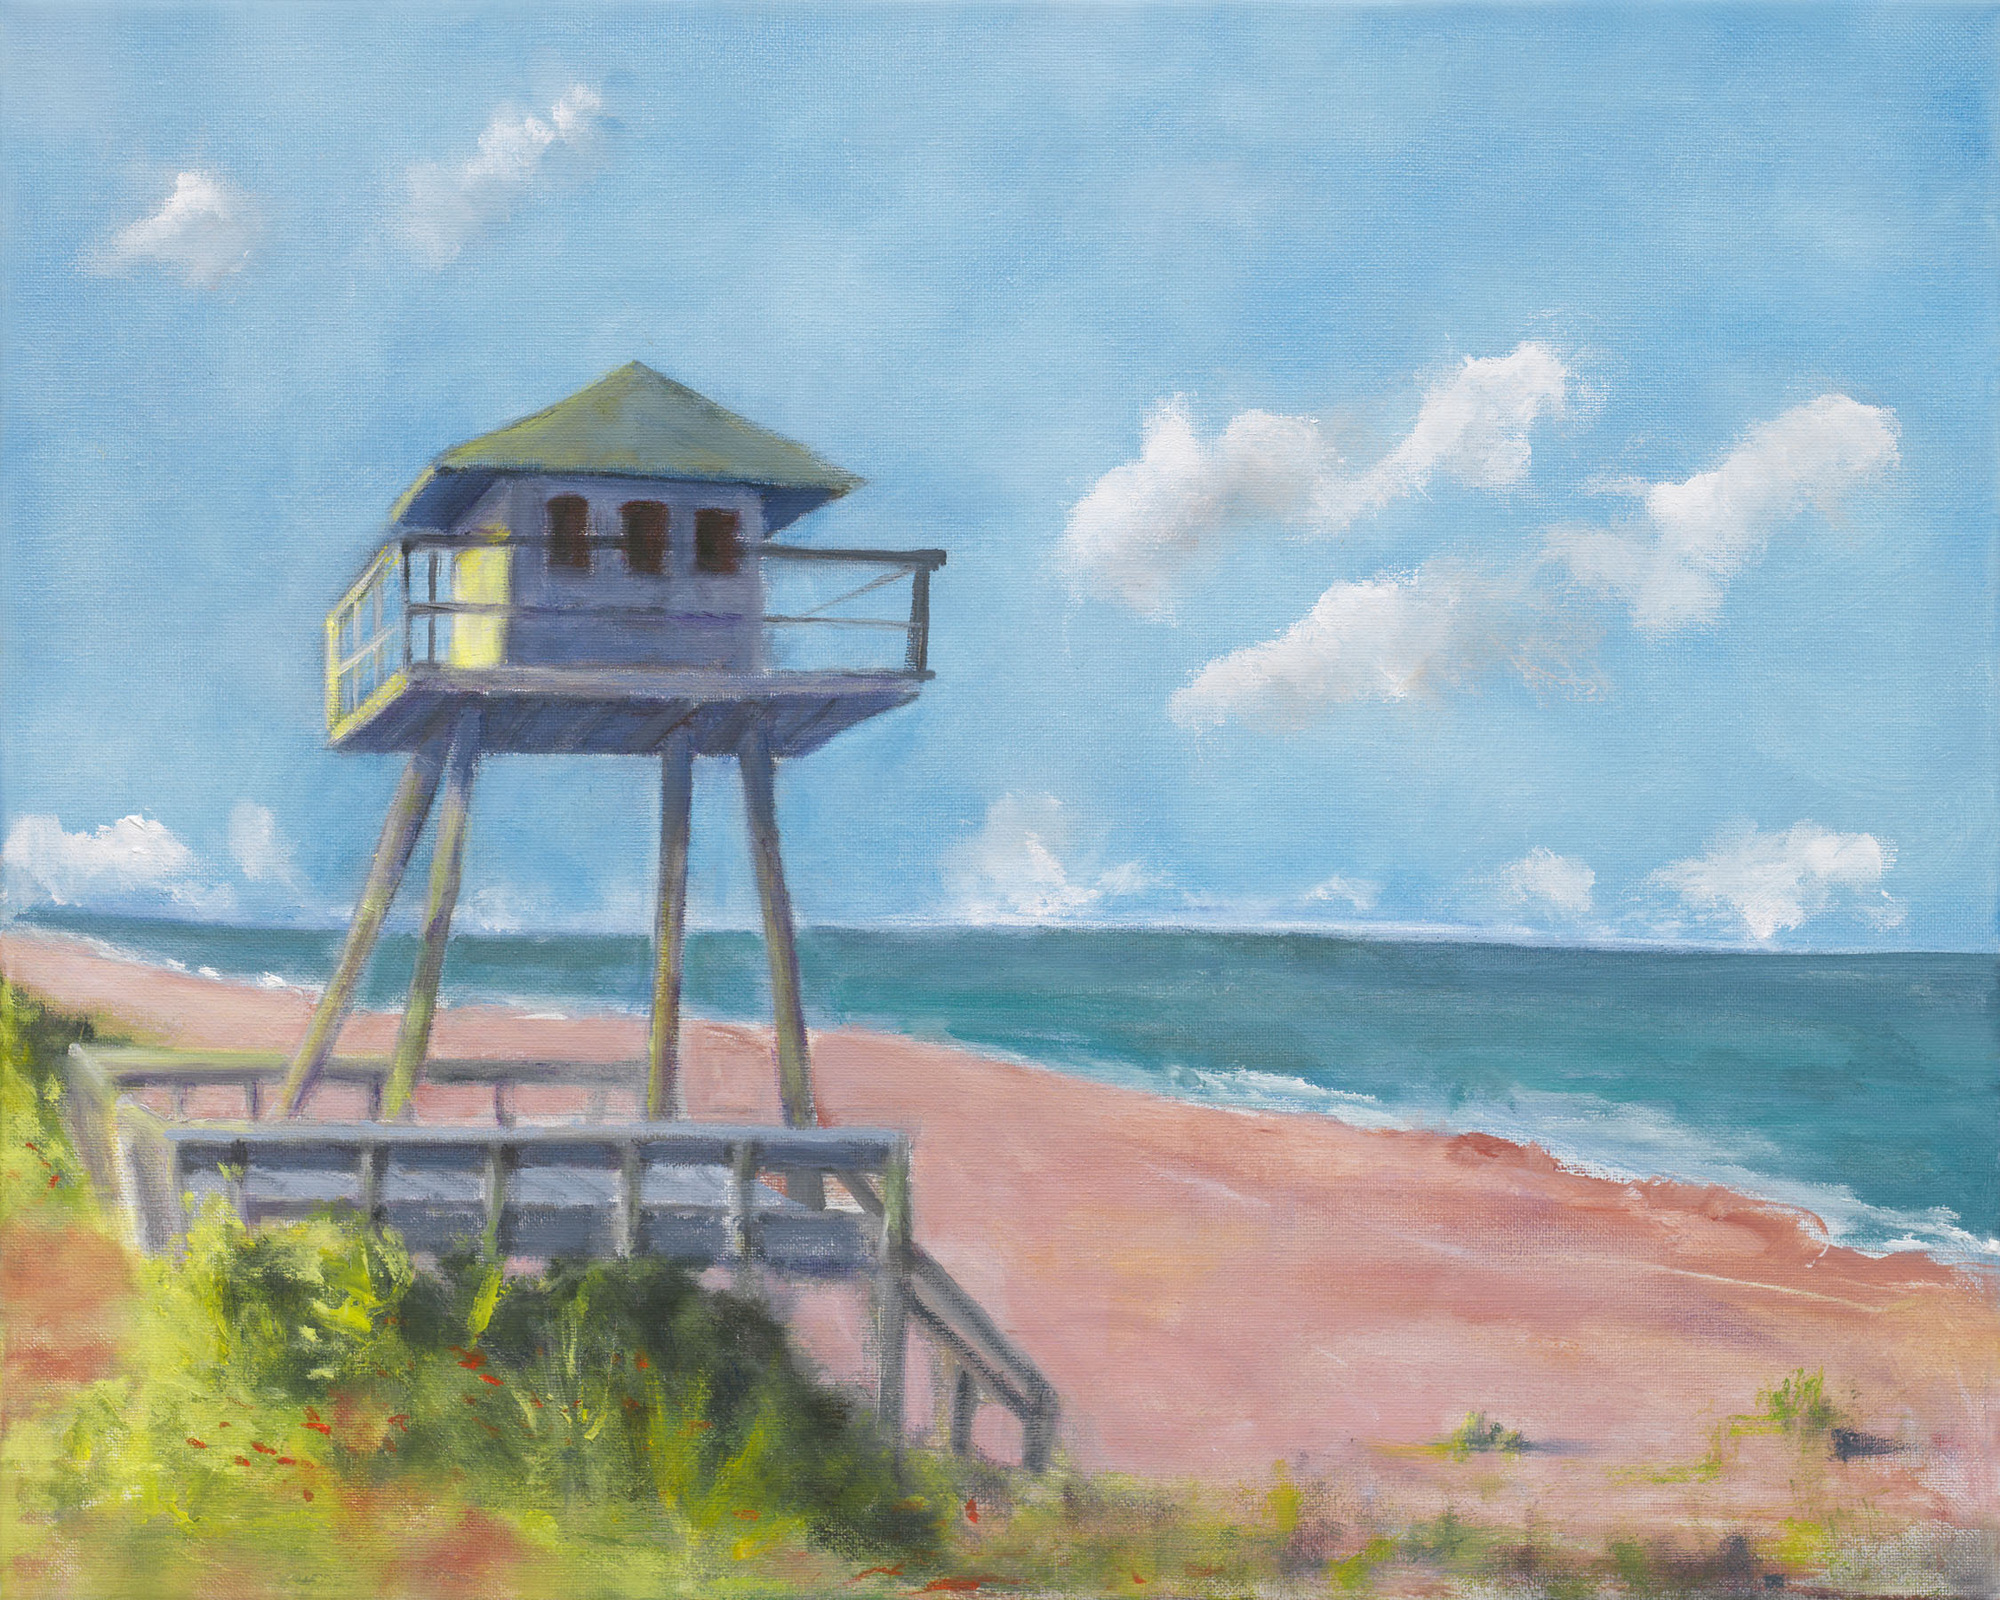 A painting of the WWII Watchtower in Ormond-by-the-sea by Barbara Saunders